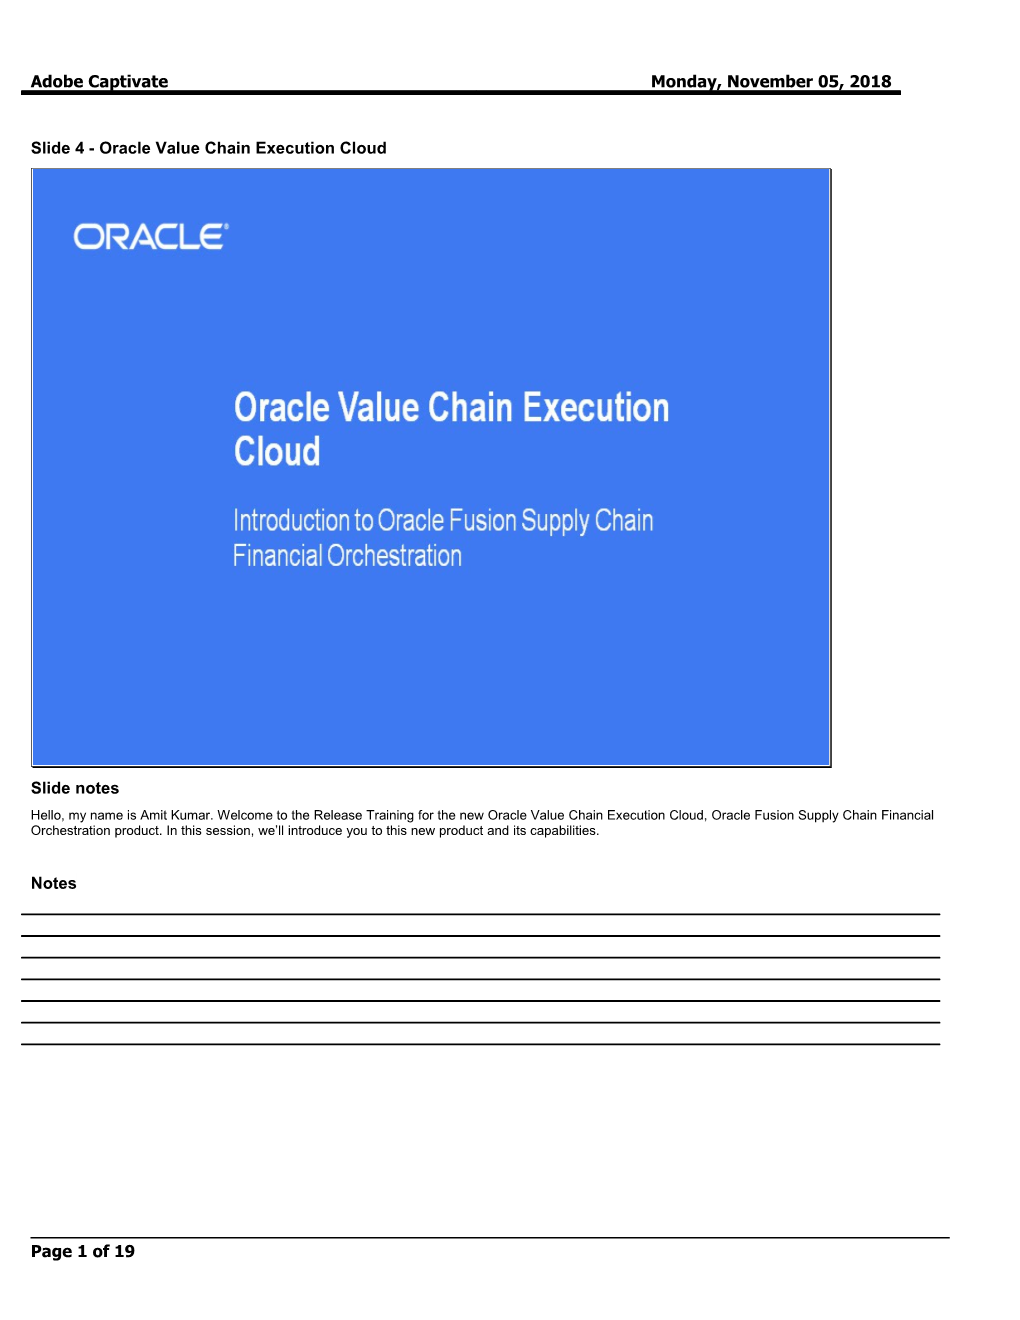 Slide 4 - Oracle Value Chain Execution Cloud